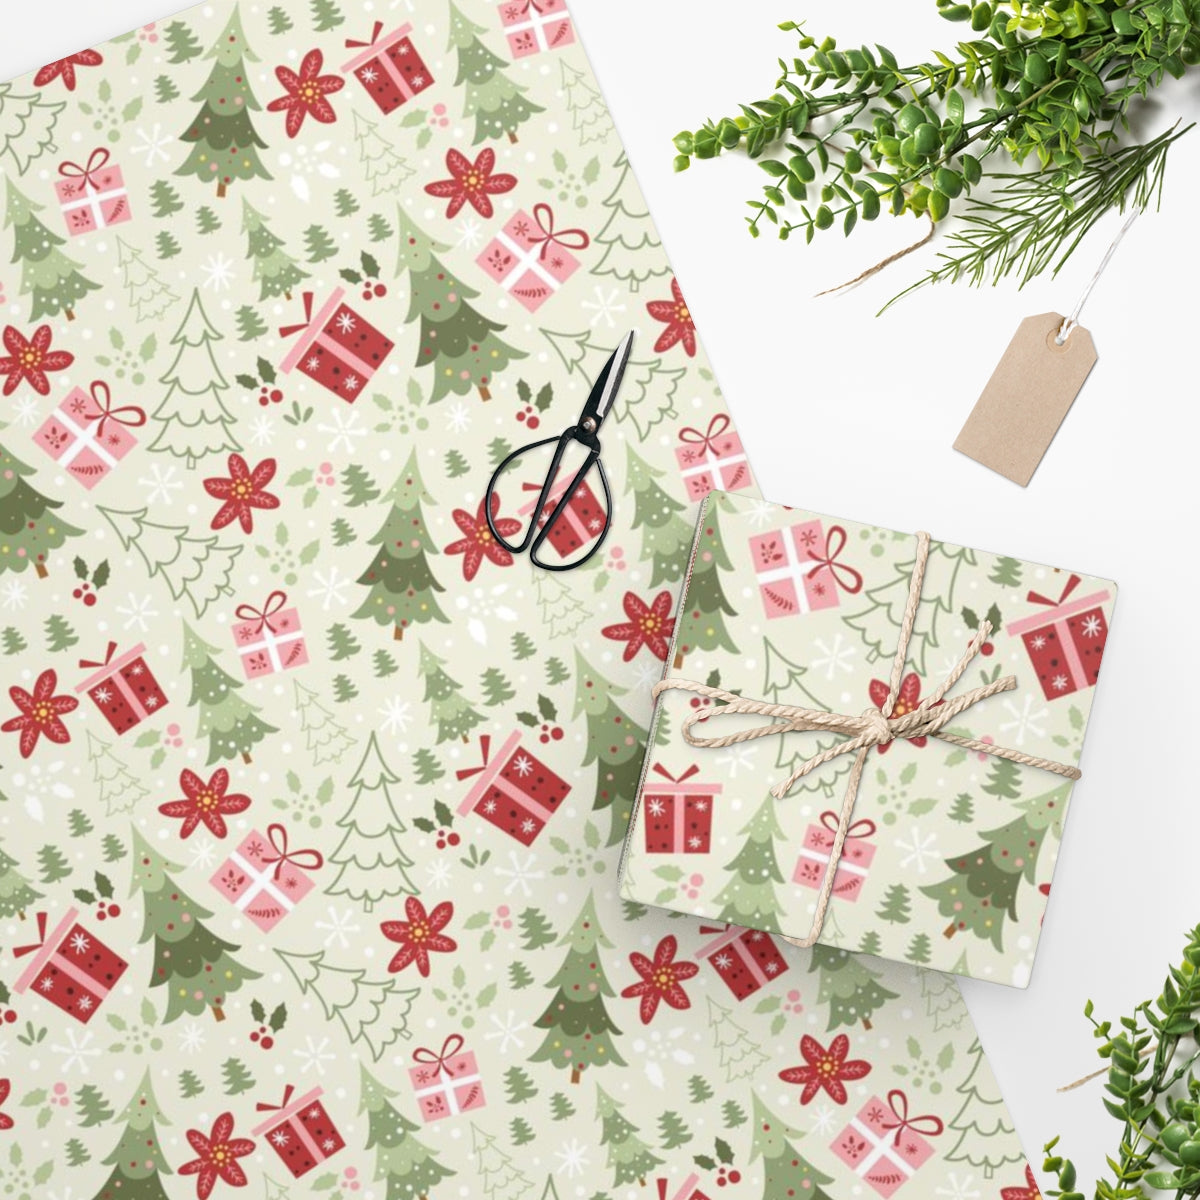 Prints and Patterns: Vintage Wrapping Paper